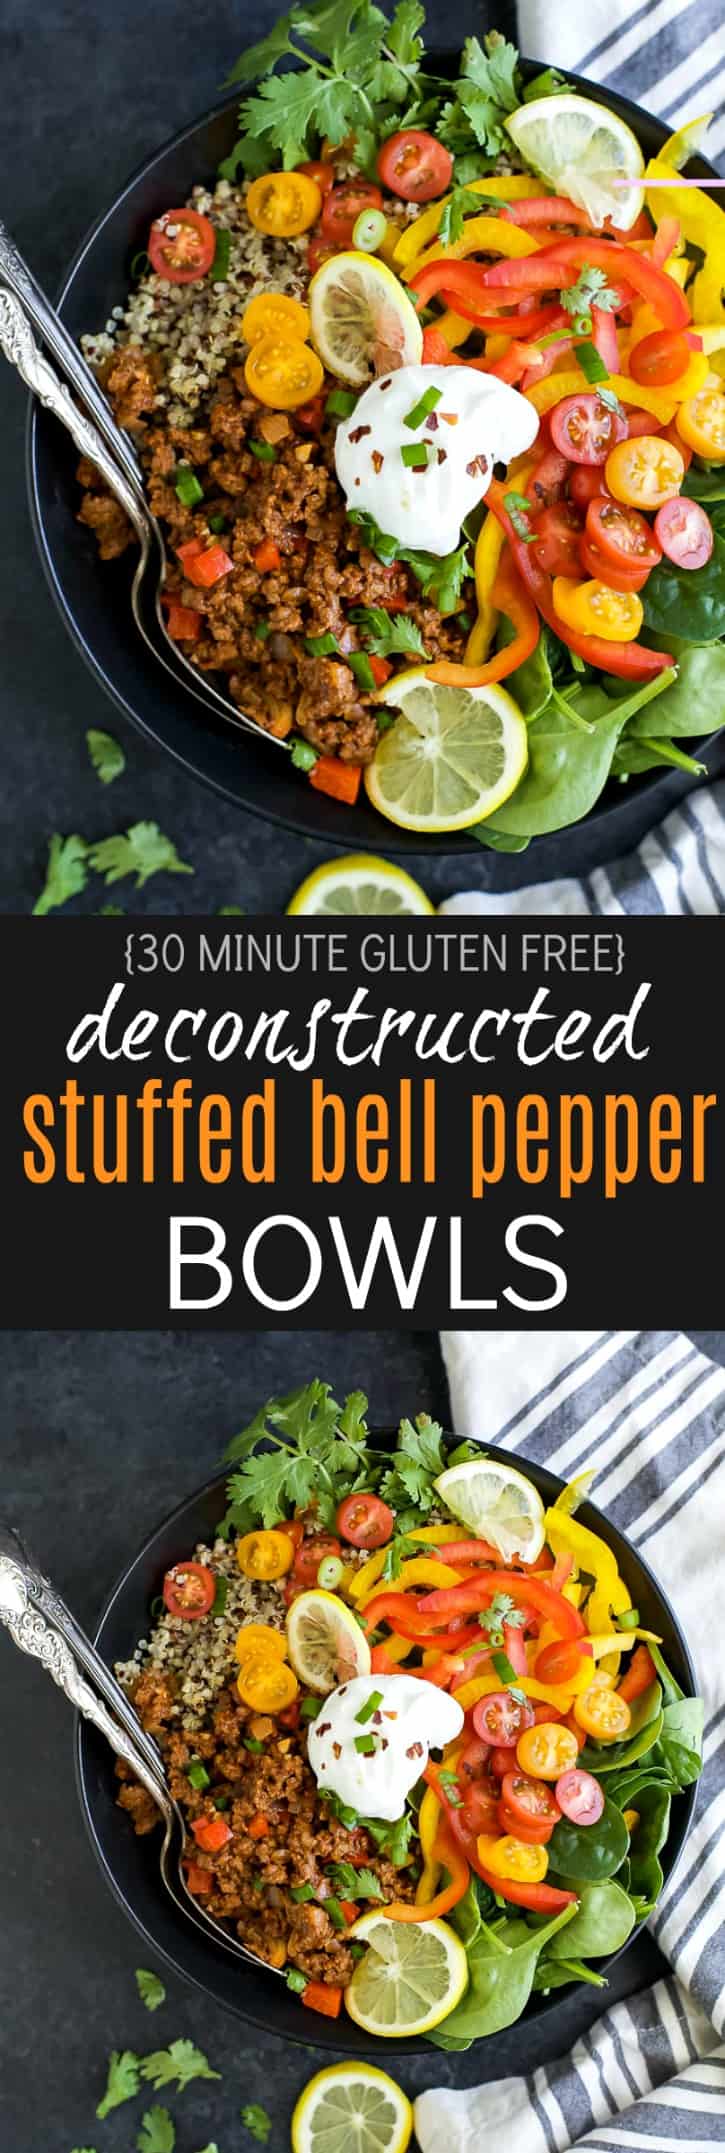 Recipe collage for Deconstructed Stuffed Bell Pepper Bowls